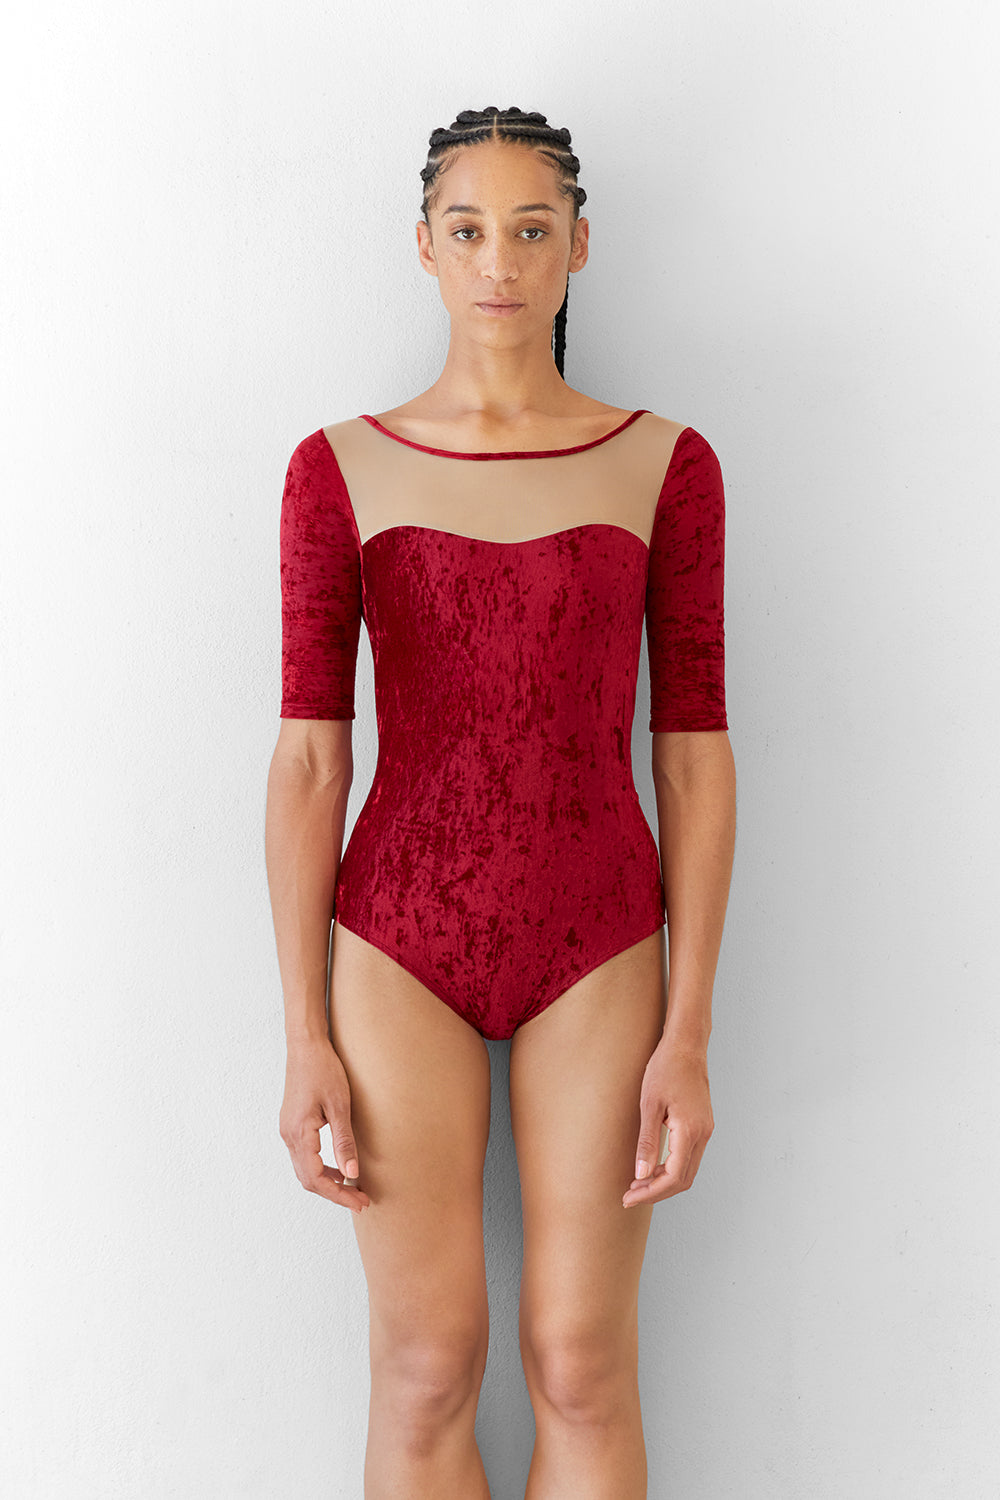 Jane leotard in CV-Dark Red body color with Mesh Dolce top color and CV-Dark Red trim color